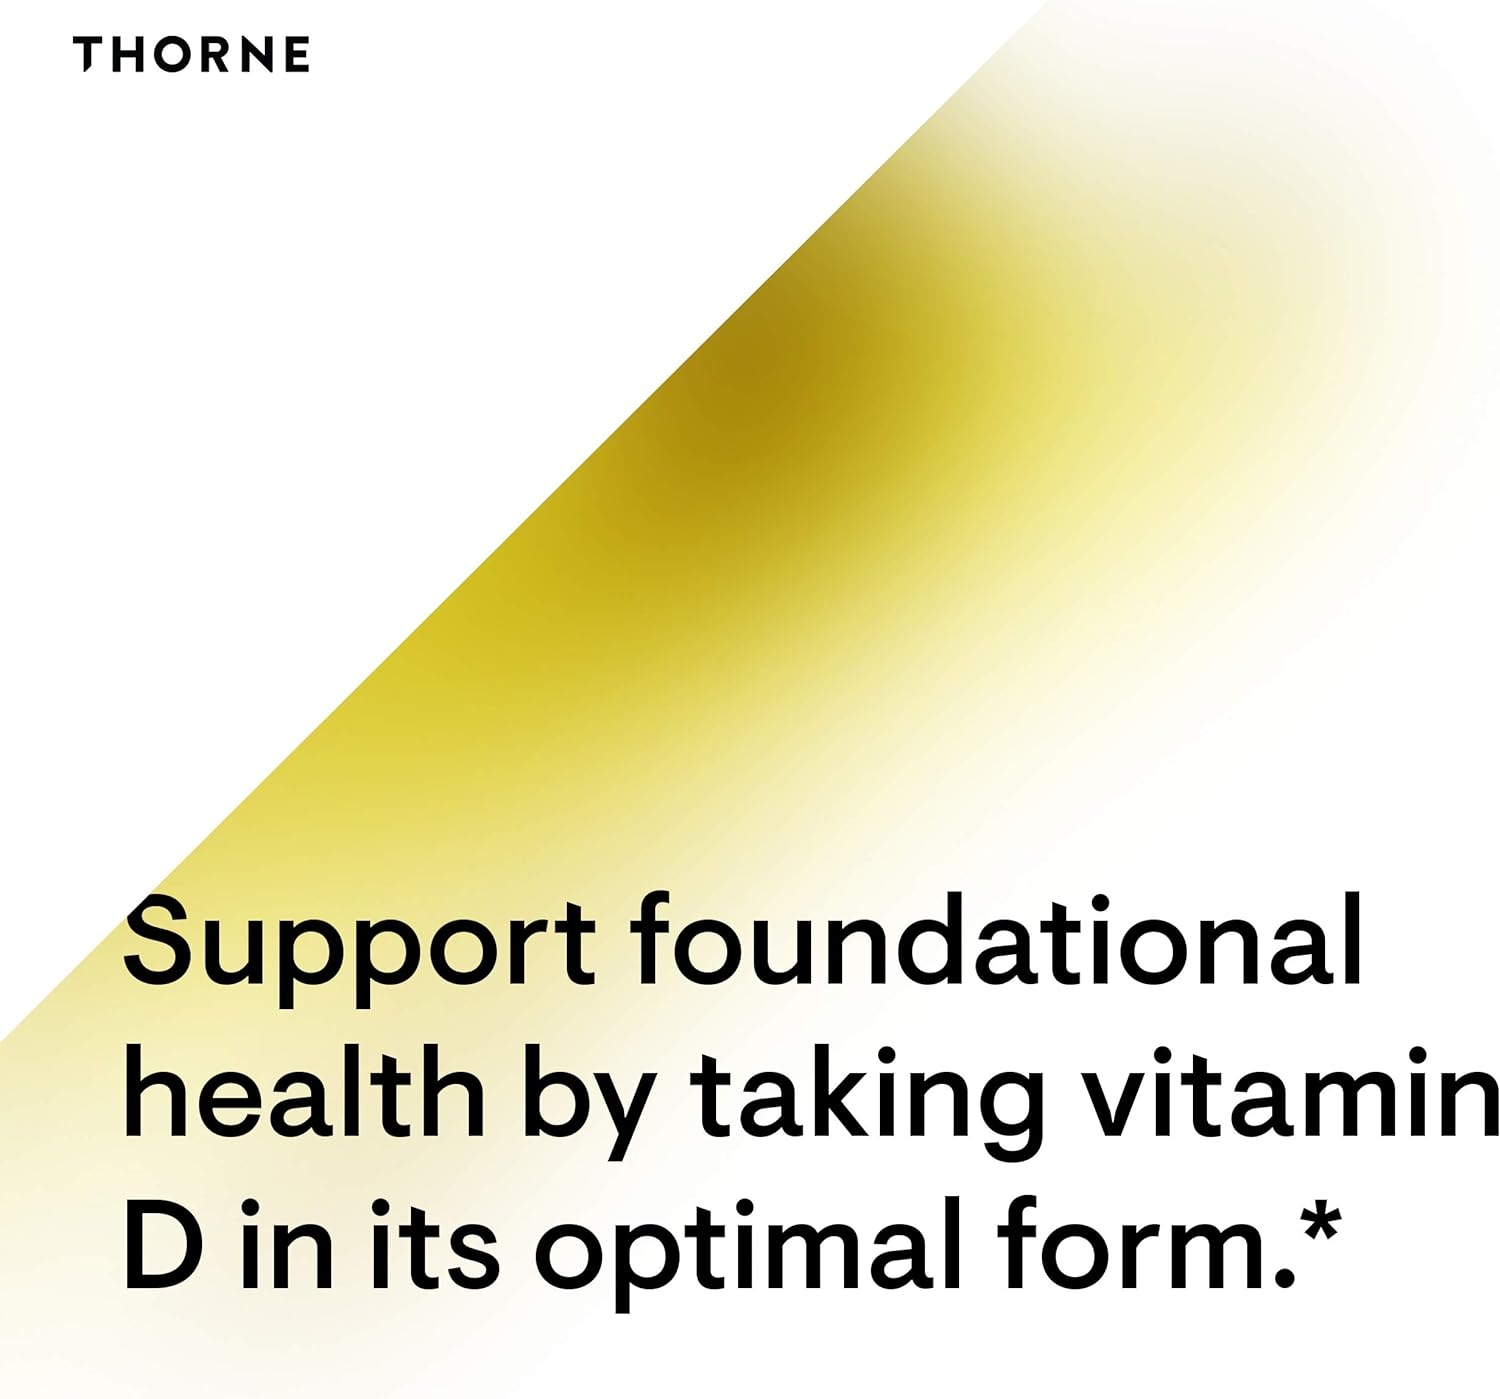 Thorne Research - Vitamin D-5000 - Vitamin D3 Supplement (5,000 IU) for Healthy Bones and Muscles - 60 Capsules